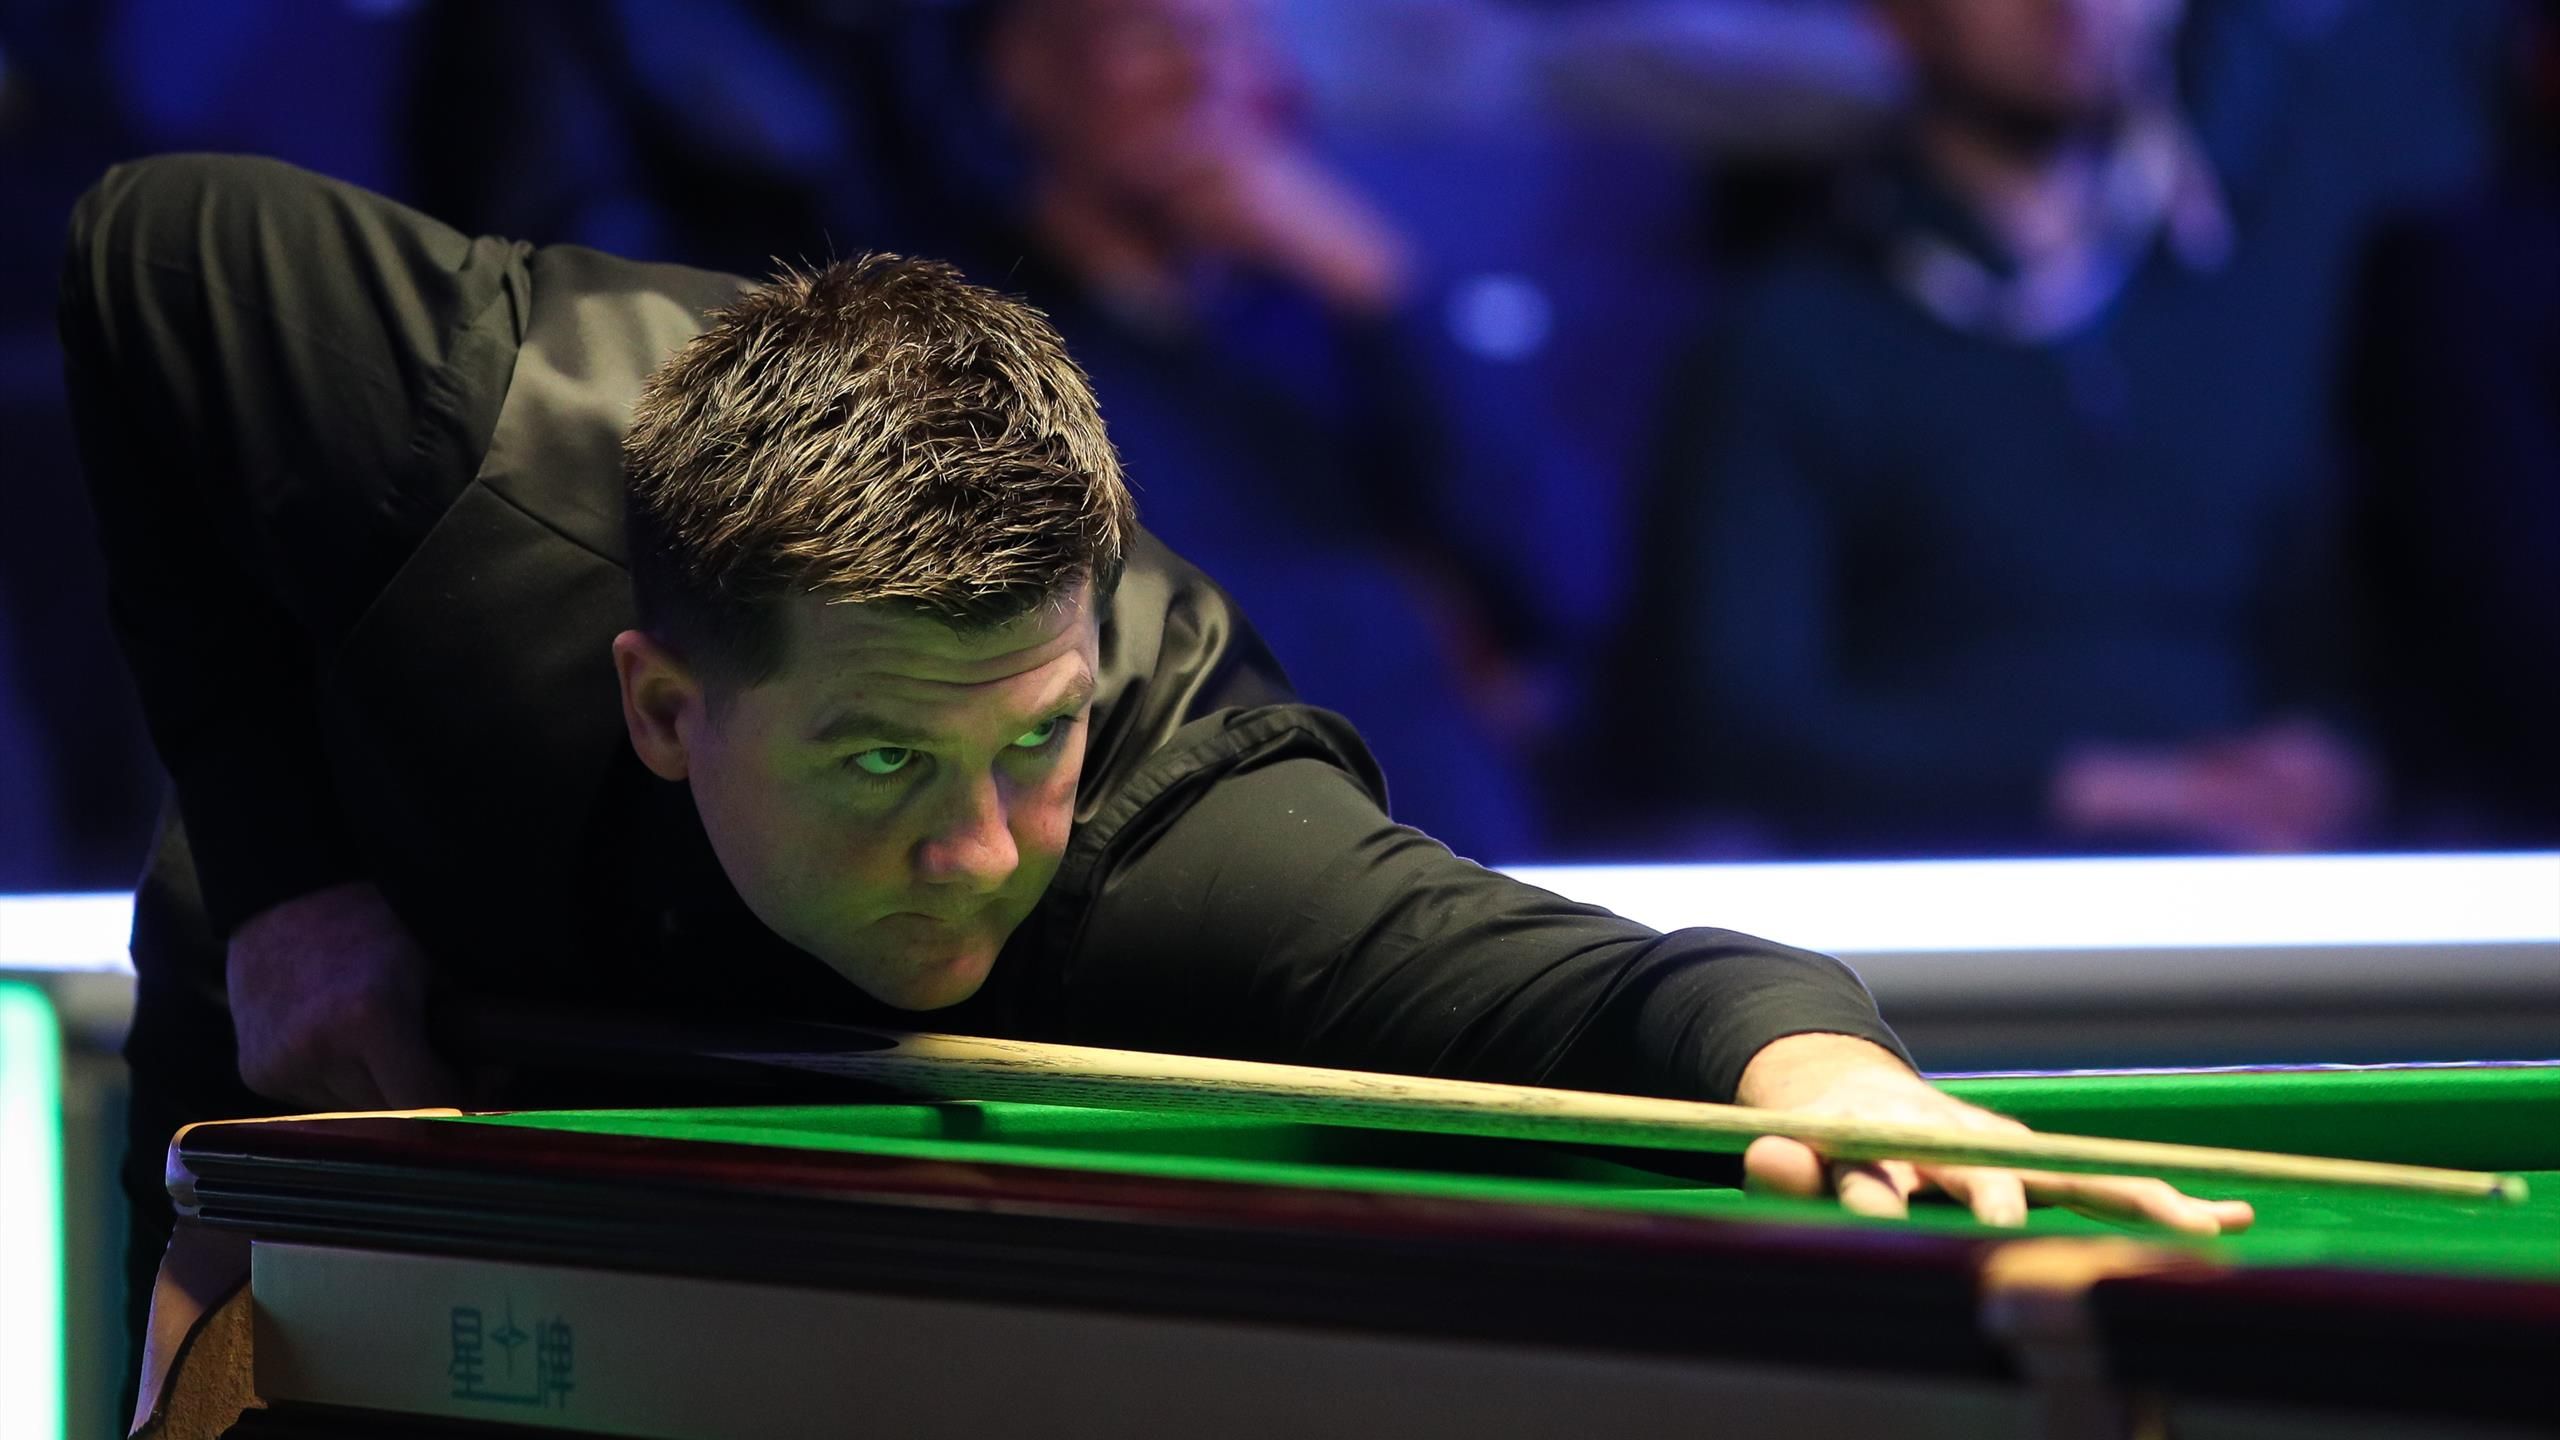 International Championship snooker Ryan Day fires 147 as Stephen Hendry and Jimmy White tumble out in qualifying